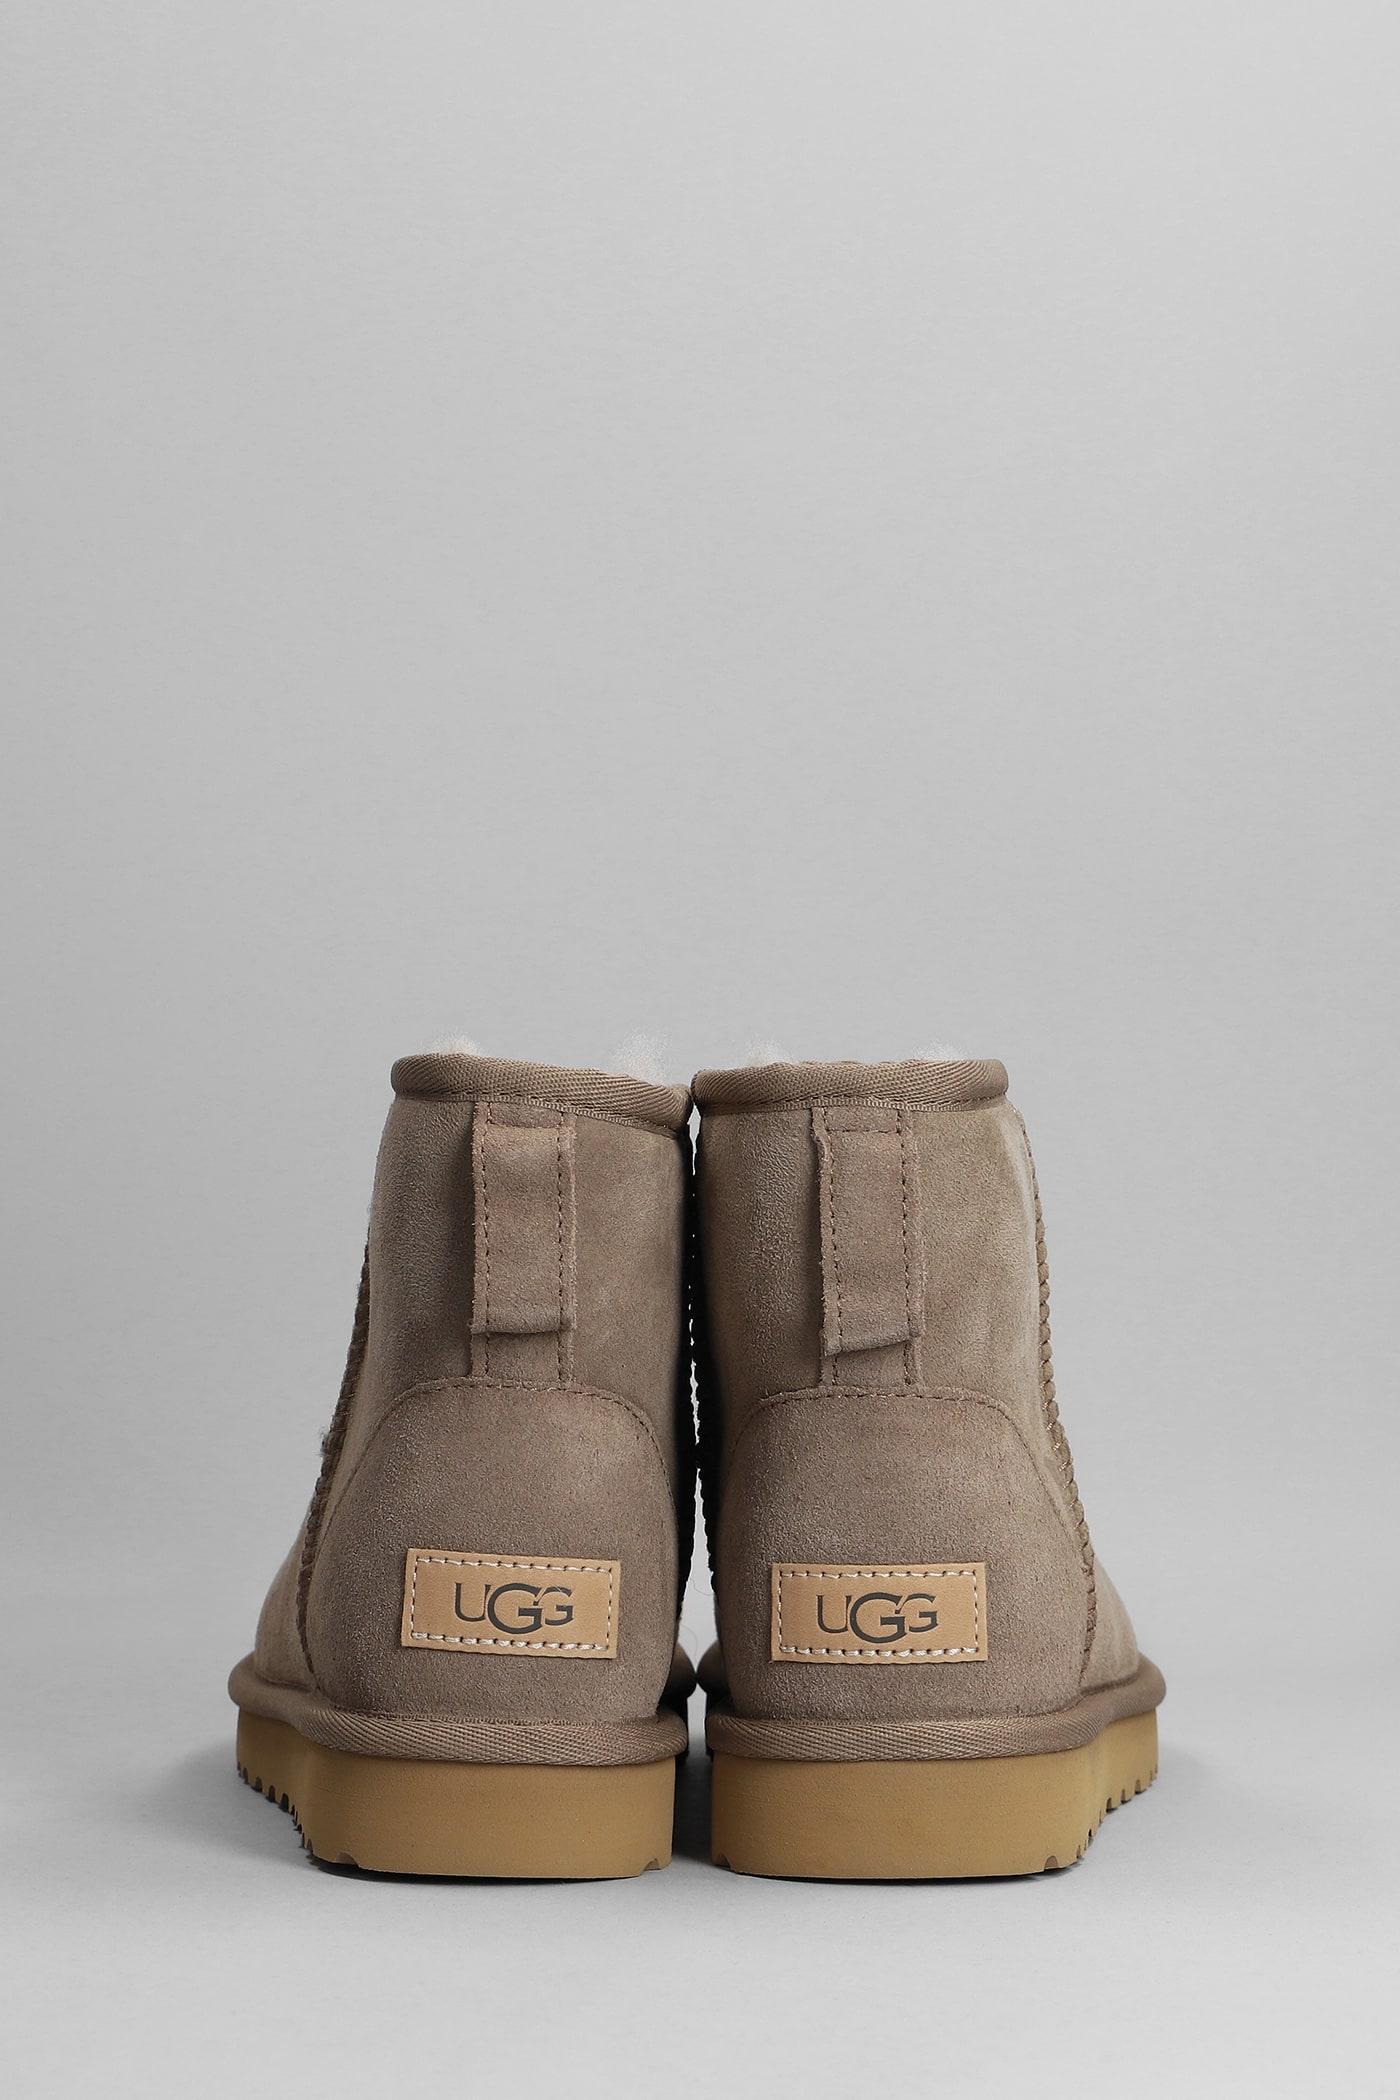 UGG Mini Classic Ii Low Heels Ankle Boots In Taupe Suede in Brown | Lyst